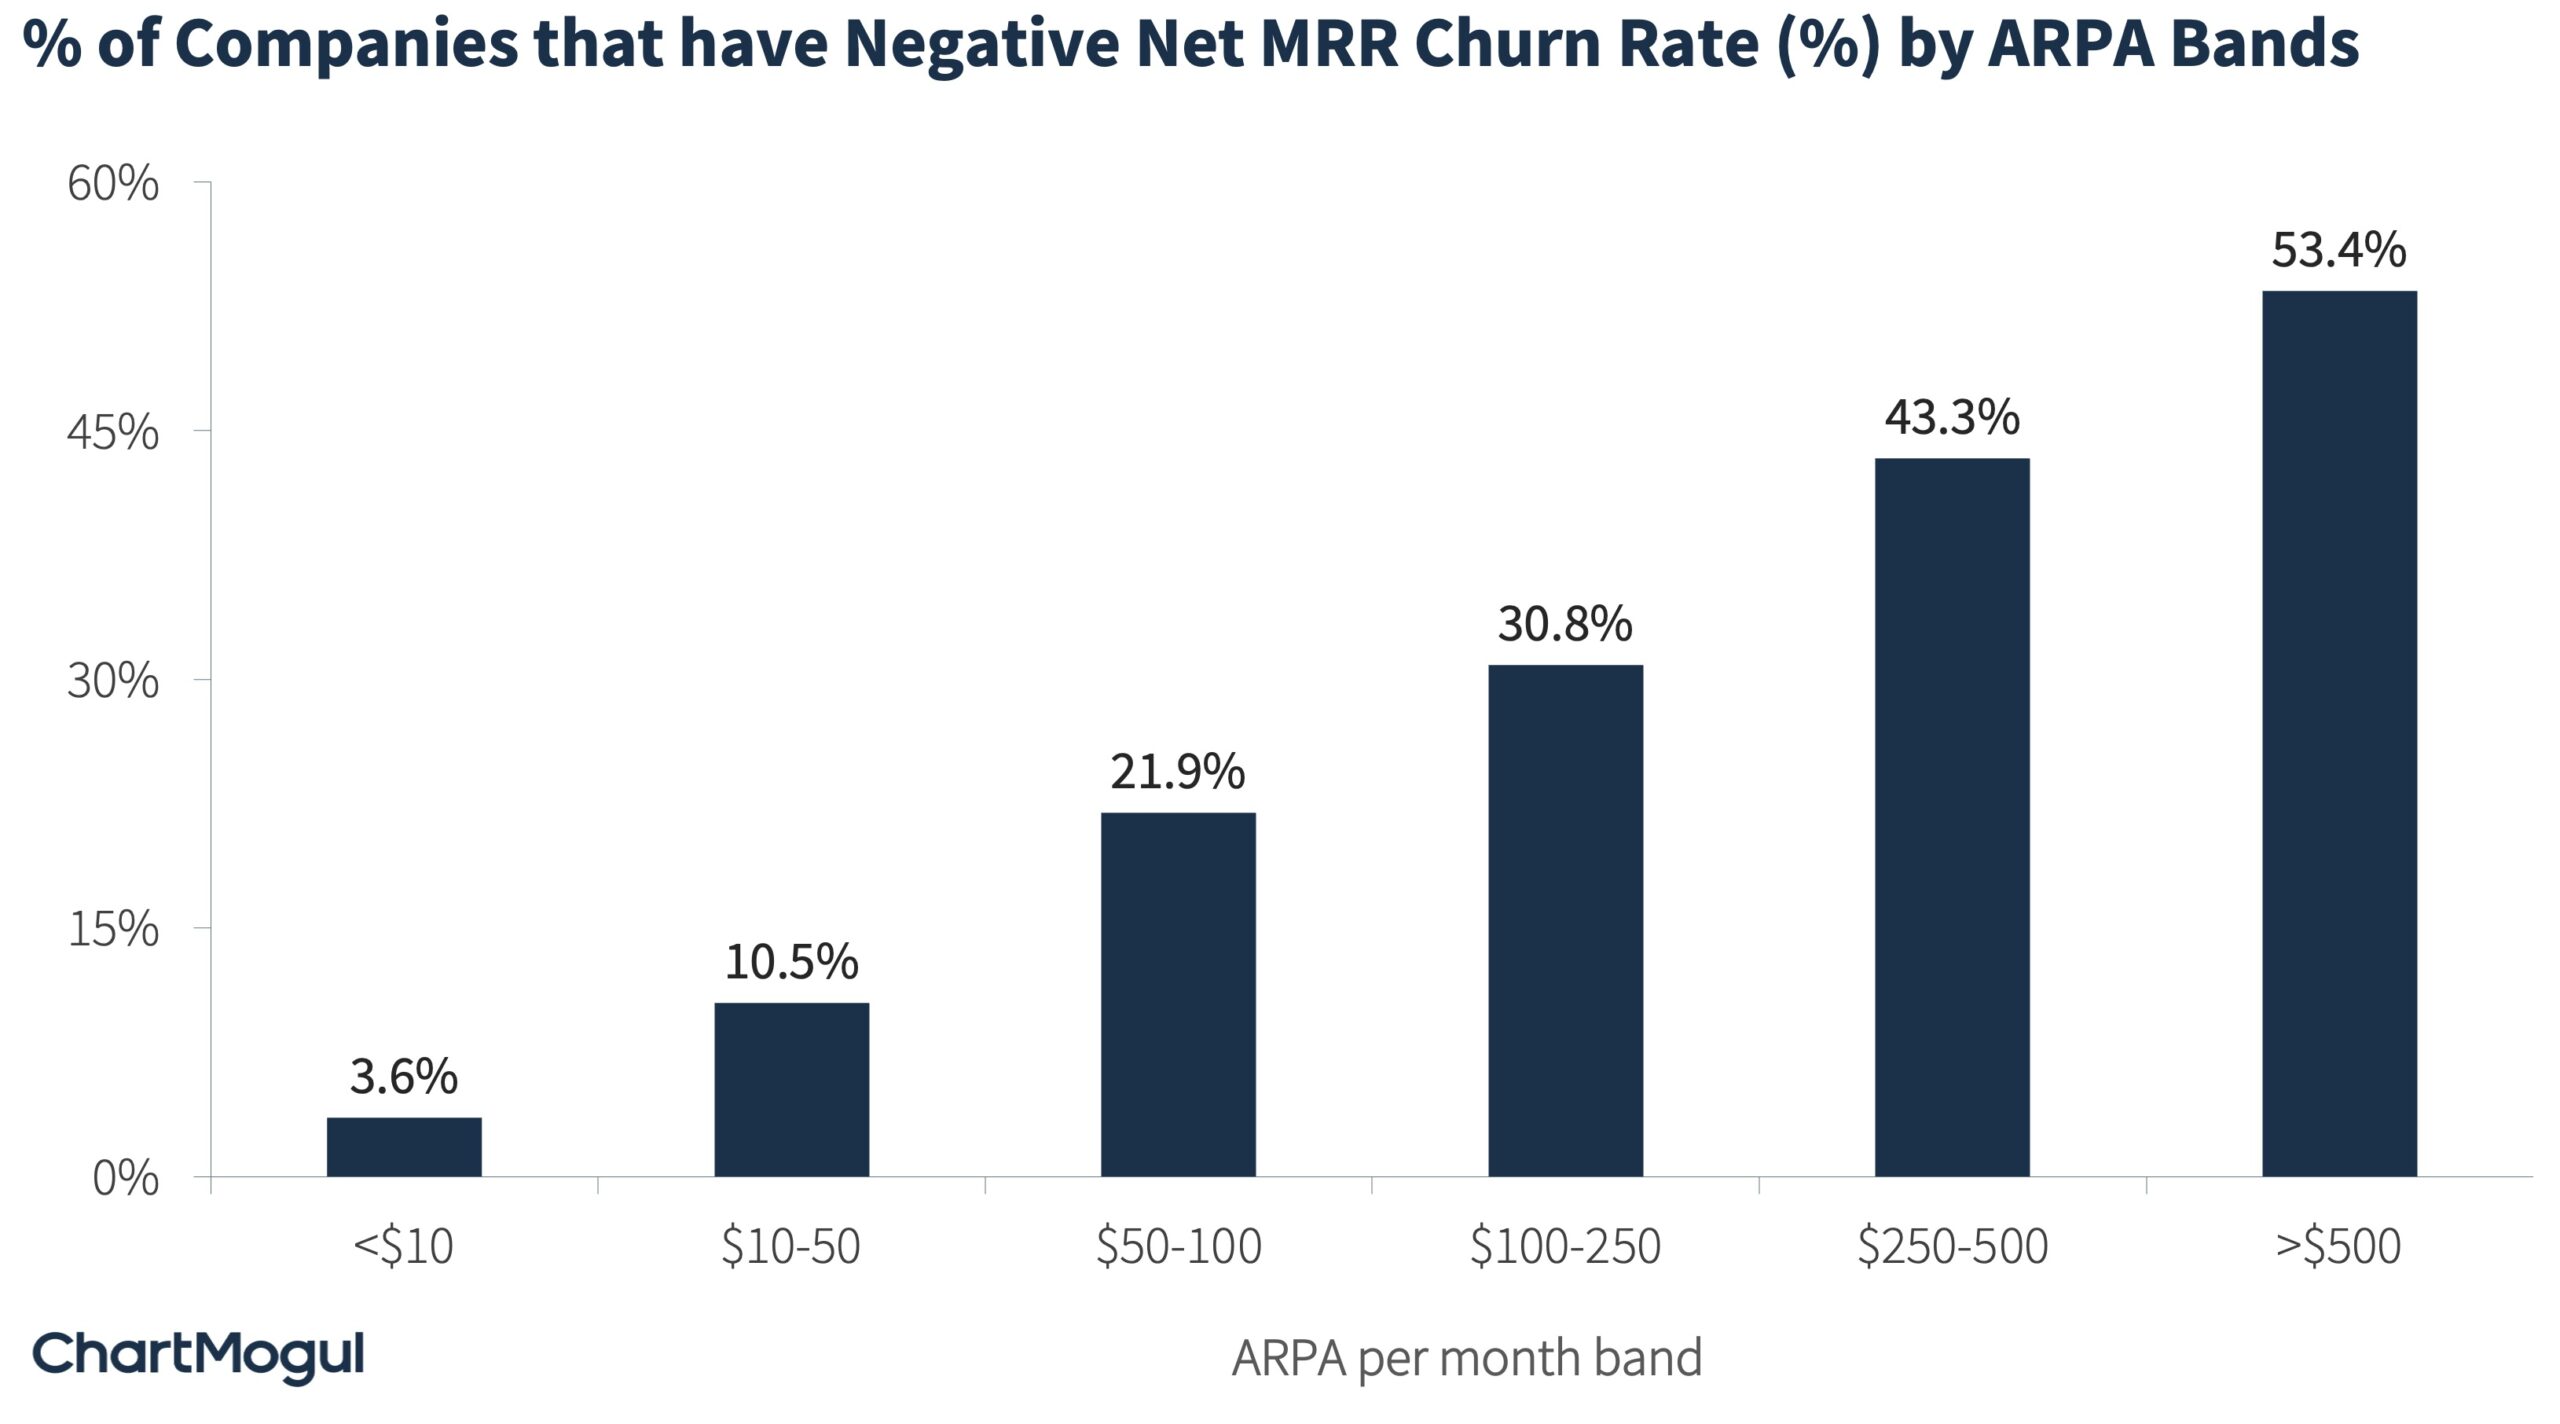 Percent of companies that have negative churn by ARPA Band